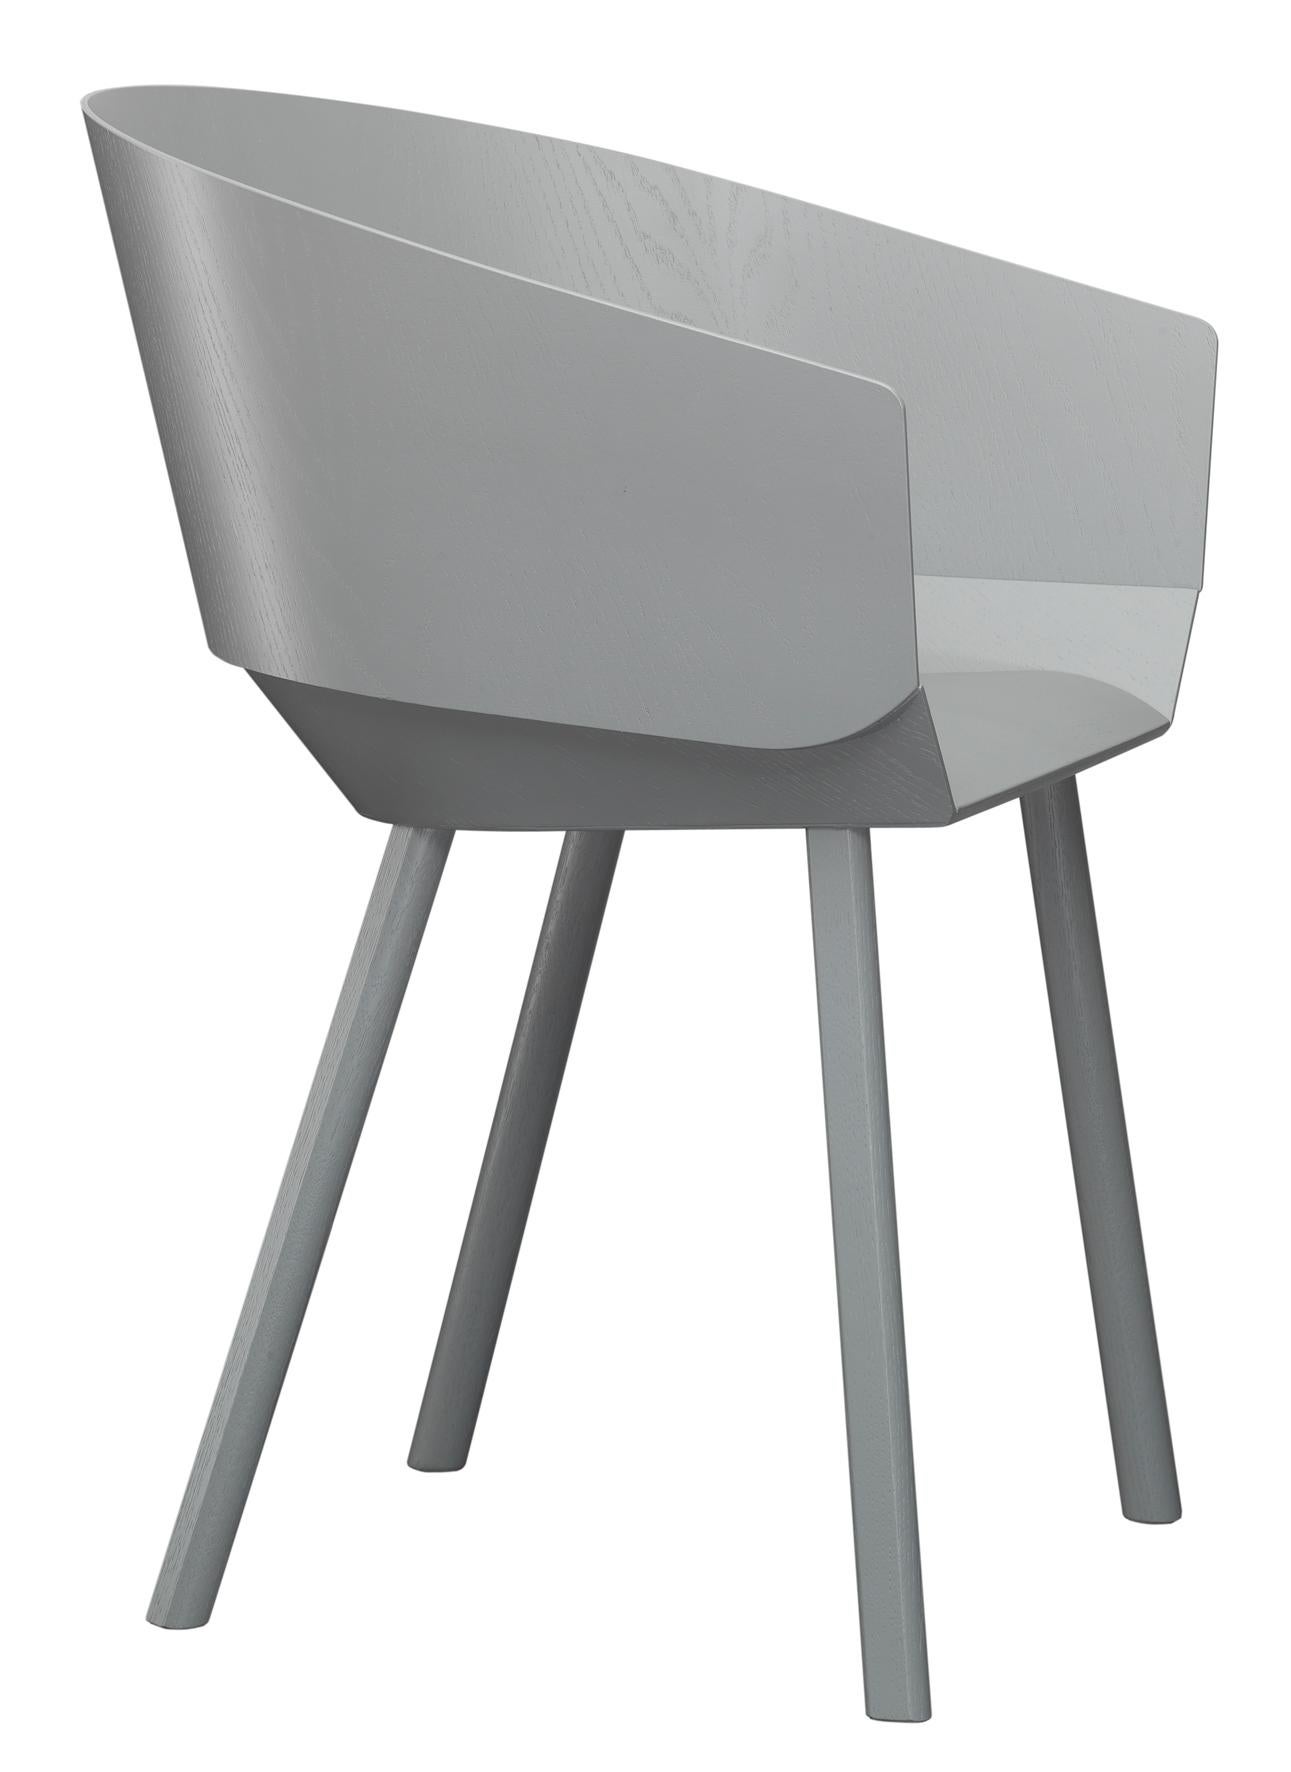 For Sale: Gray (Traffic Gray Lacquer) e15 Customizable Houdini Armchair by Stefan Diez